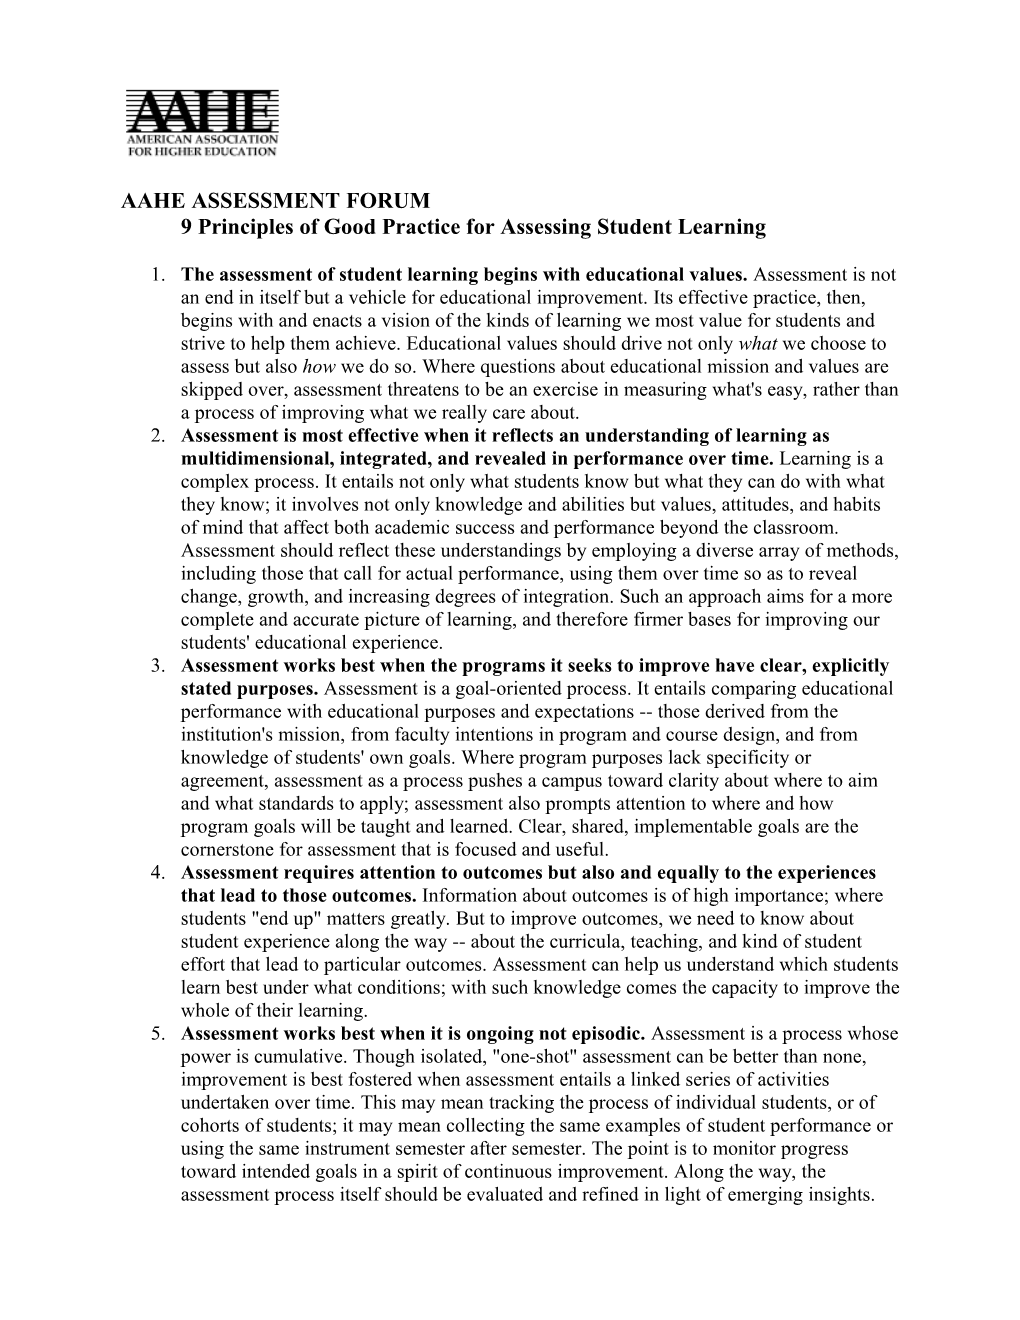 AAHE ASSESSMENT FORUM9 Principles of Good Practice for Assessing Student Learning